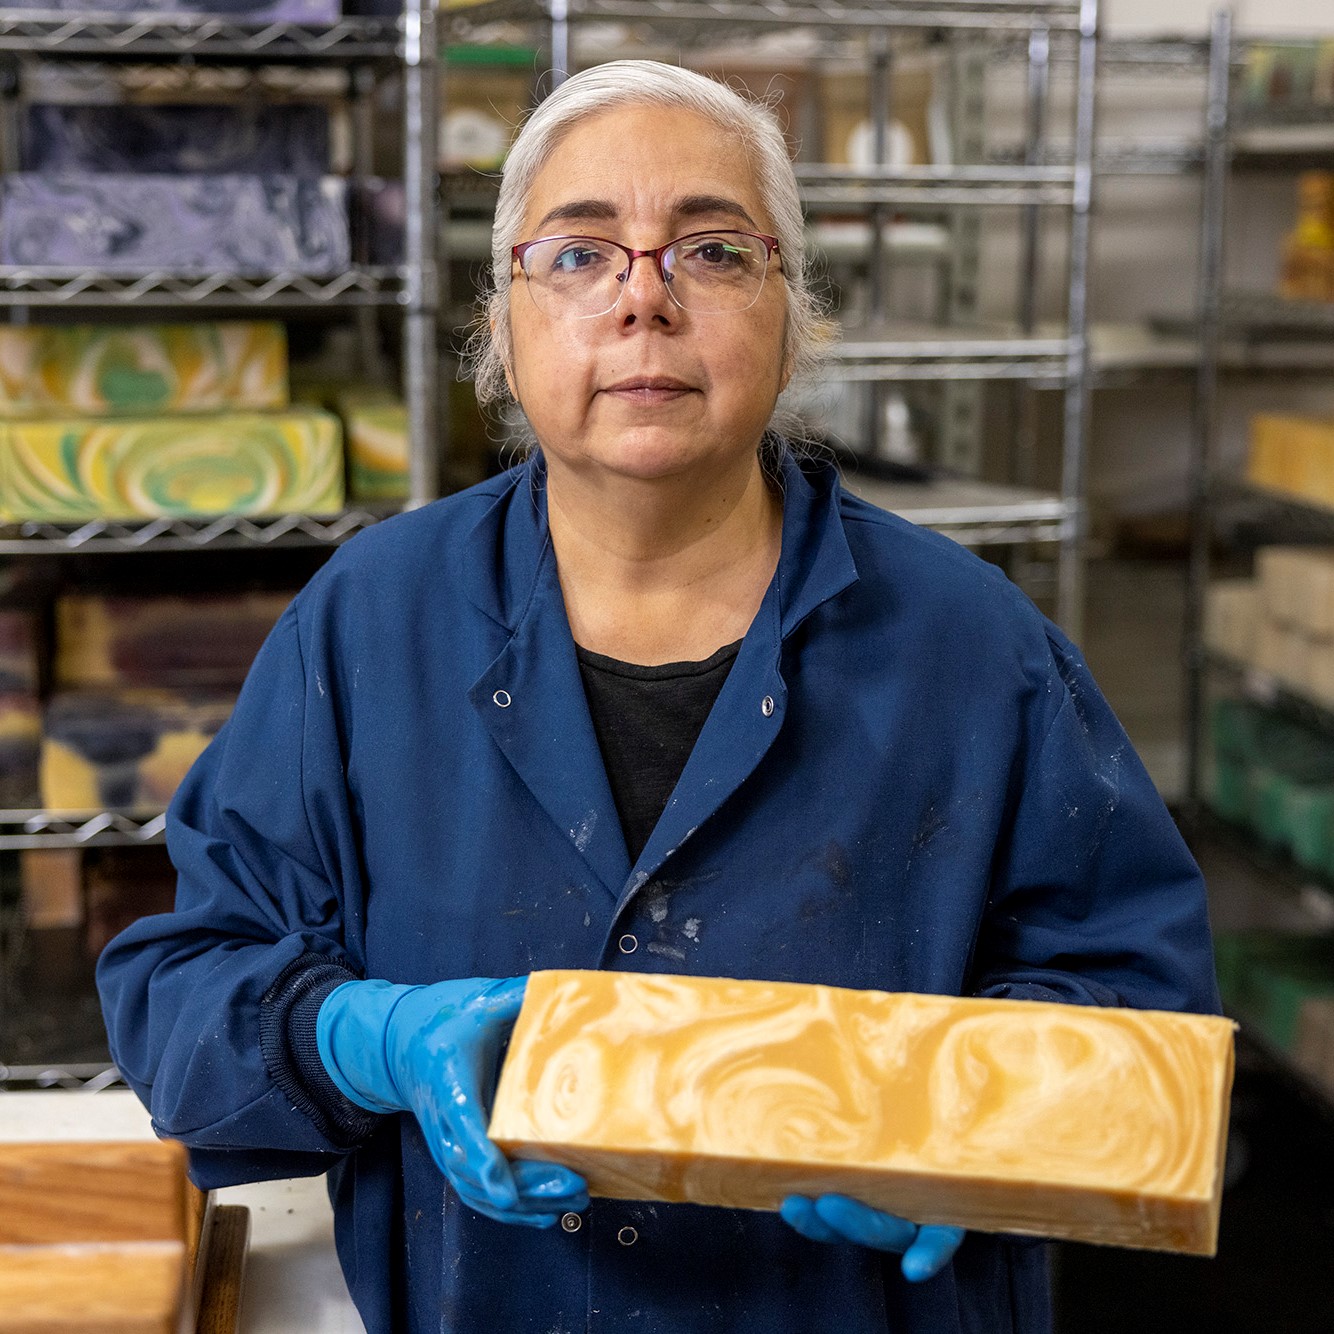 Owner and founder of Soap Cauldron, Emma Mann, holding up large block of soap